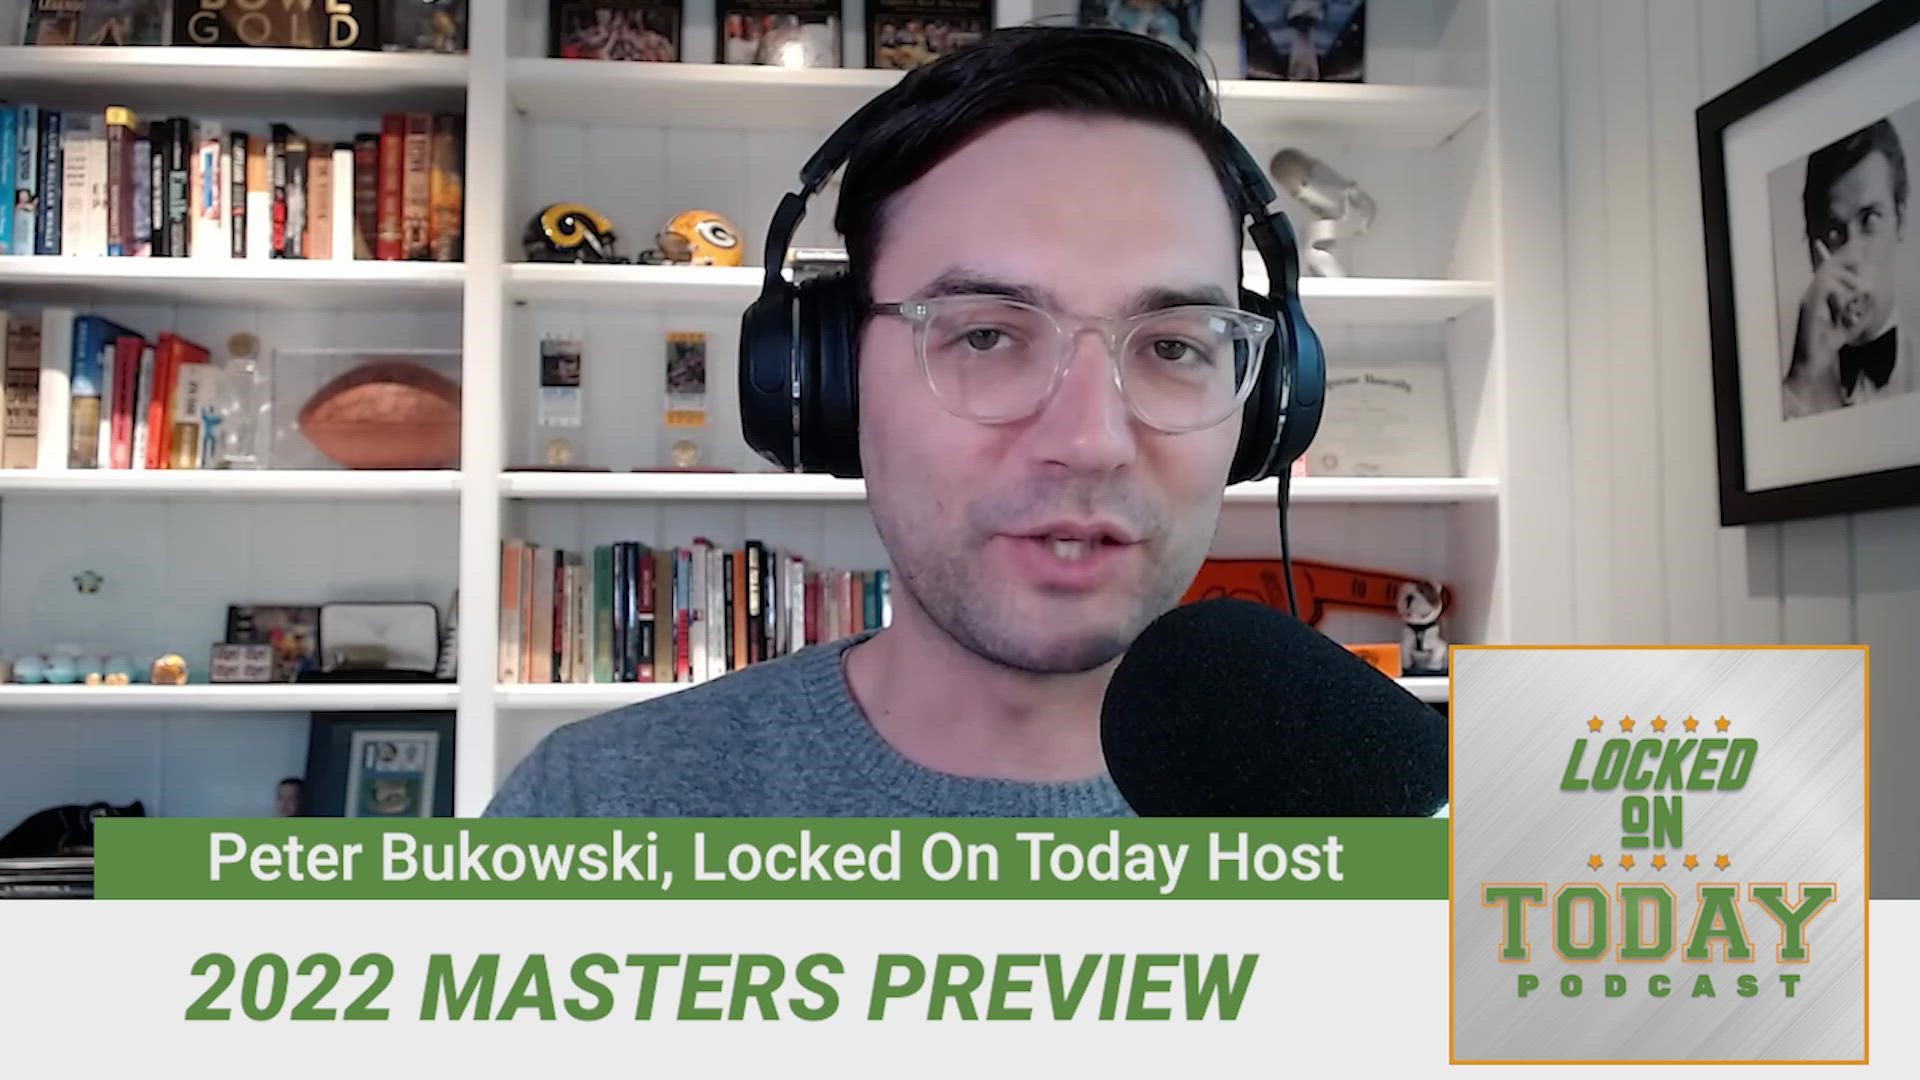 Longtime golf writer Bob Harig joins Peter Bukowski to preview the 2022 Masters Tournament.